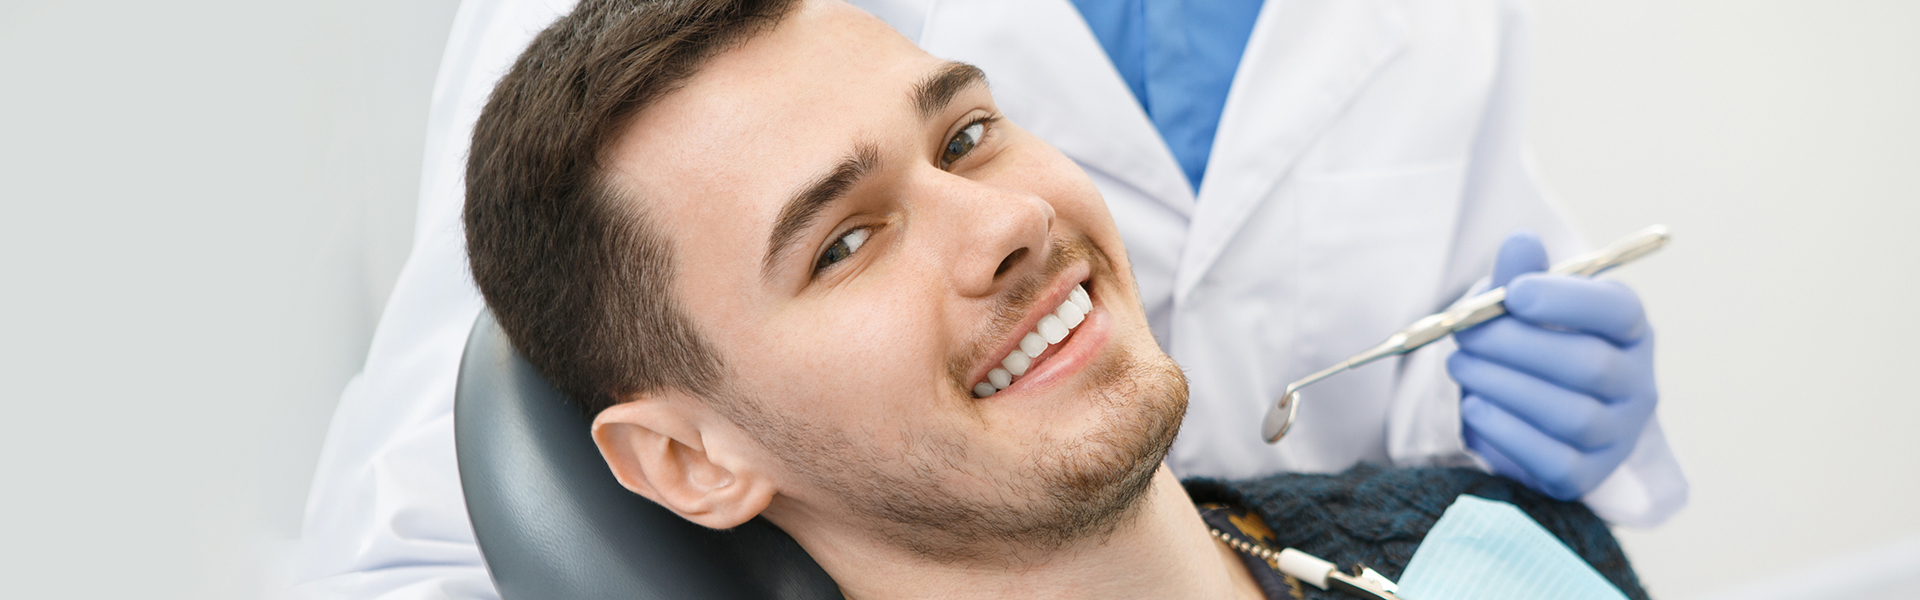 Why Sedation Dentistry Is Ideal During Your Appointments